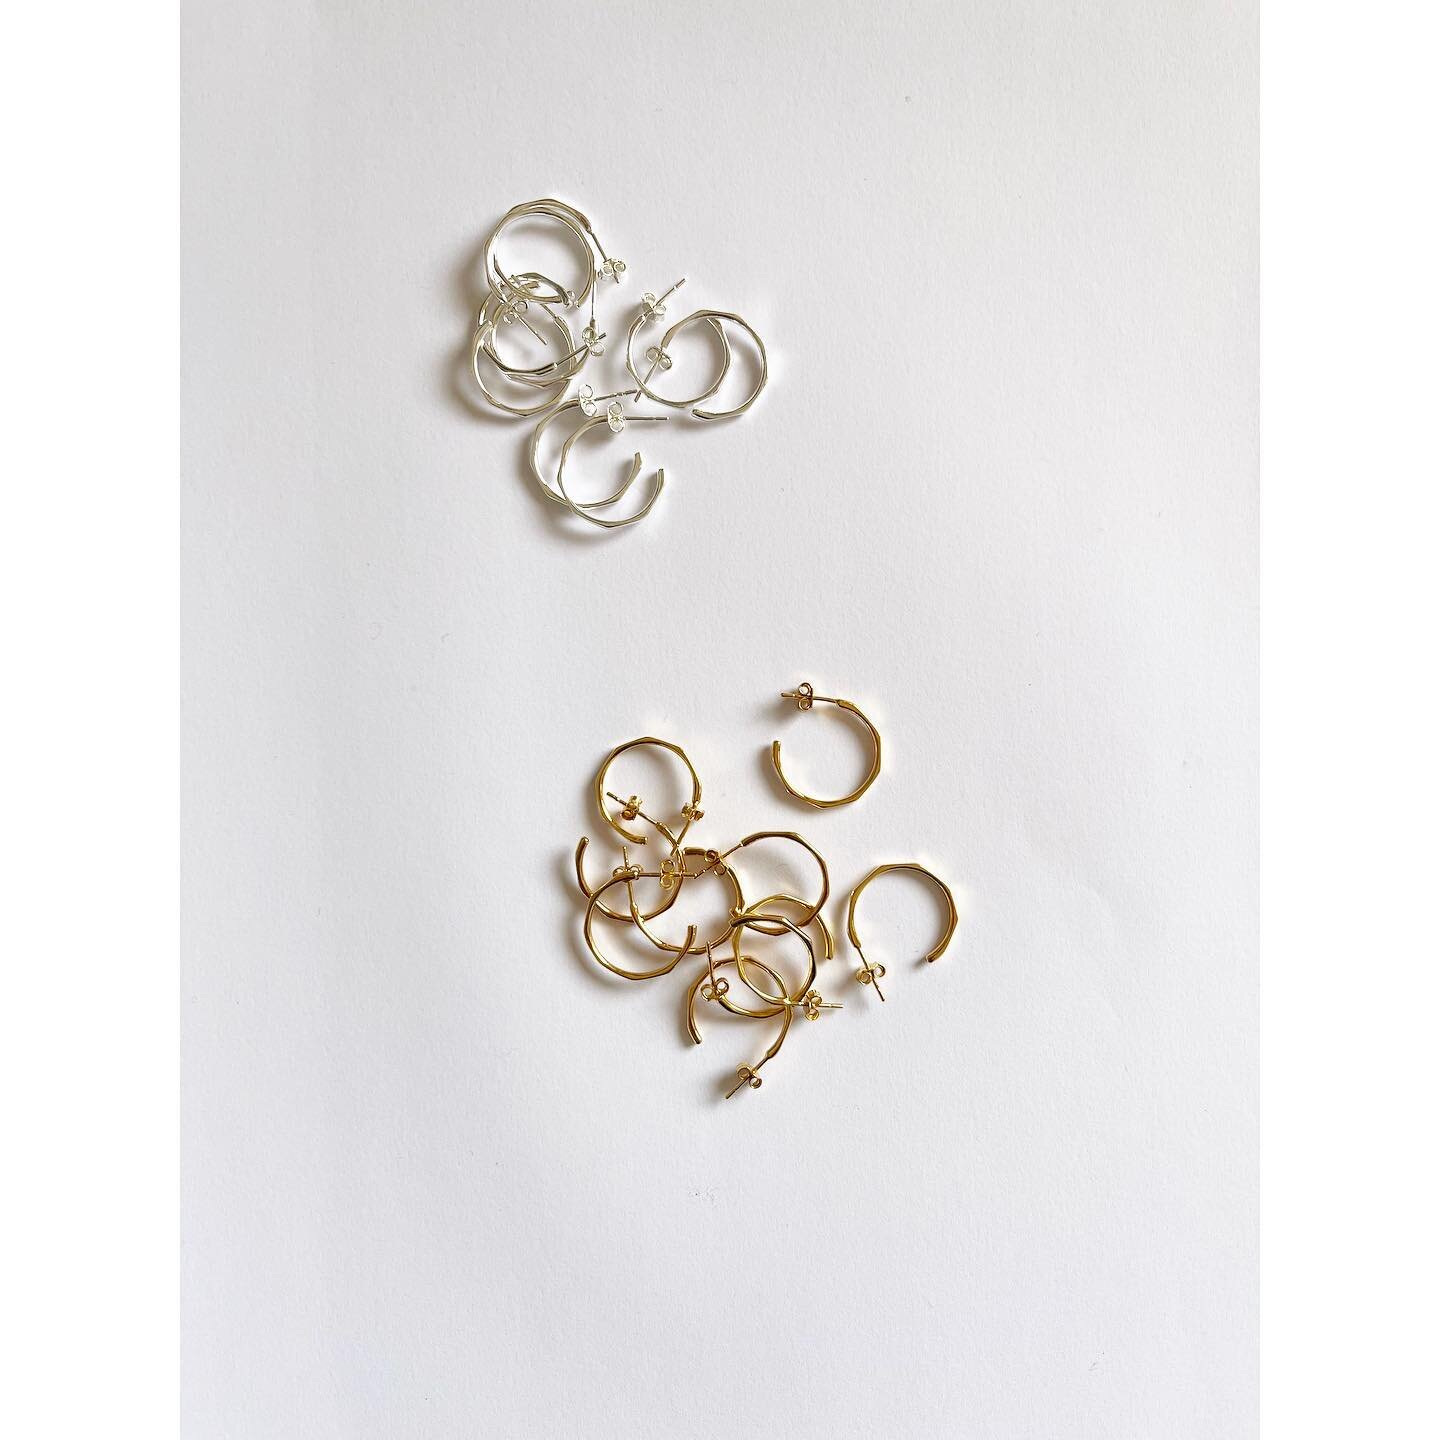 Thin hoop earrings in silver or gold plated, perfect for layering up.